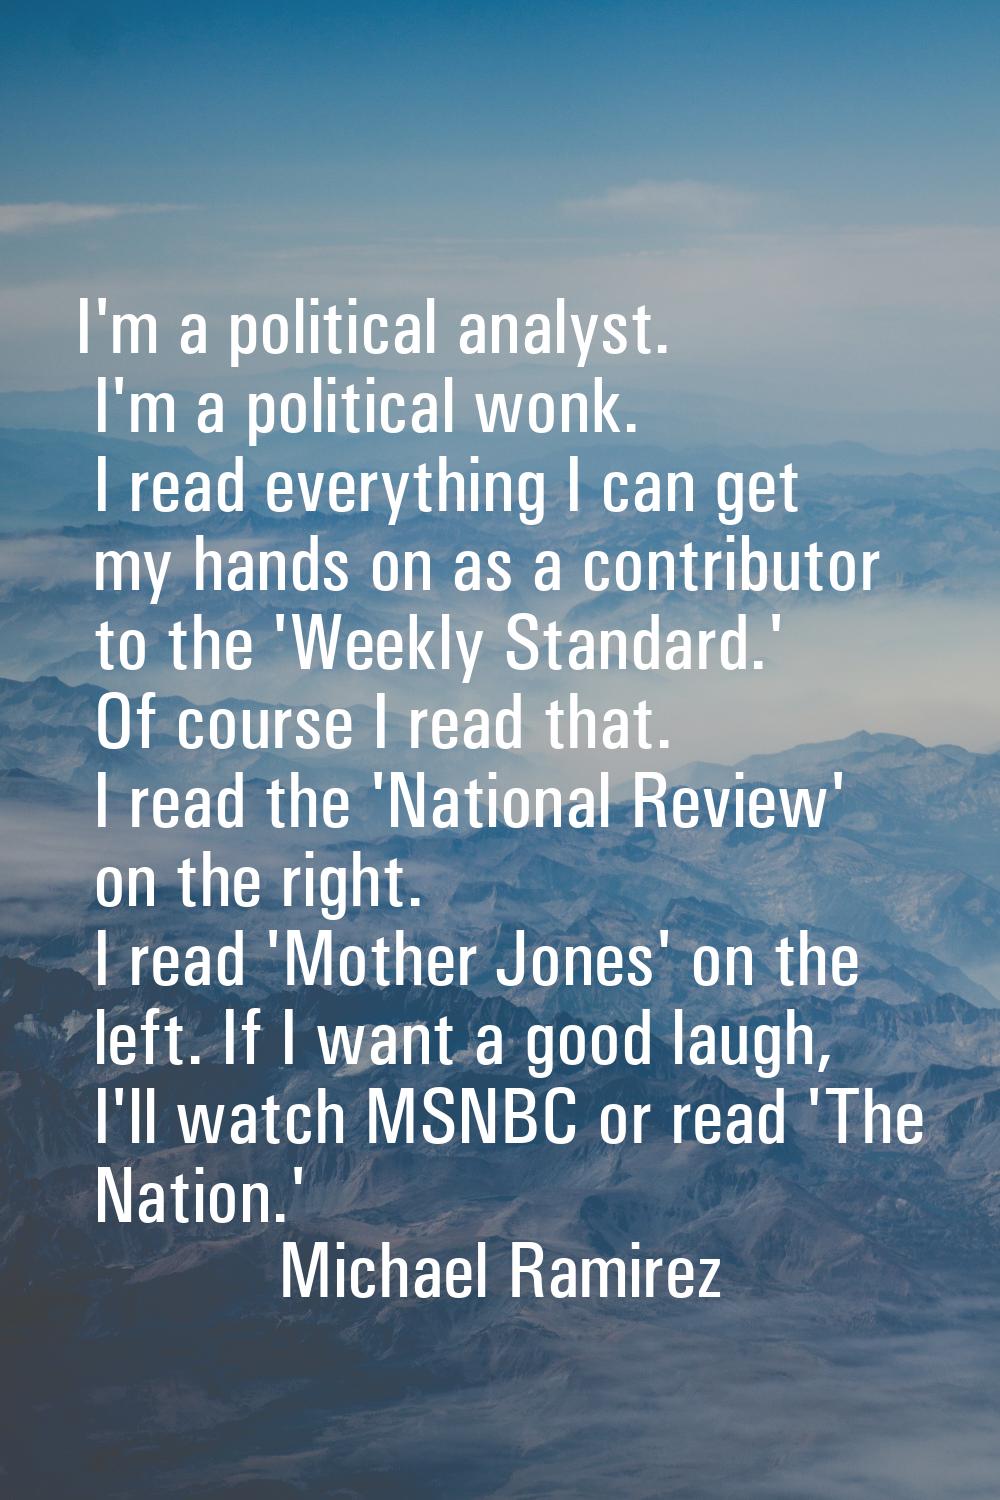 I'm a political analyst. I'm a political wonk. I read everything I can get my hands on as a contrib